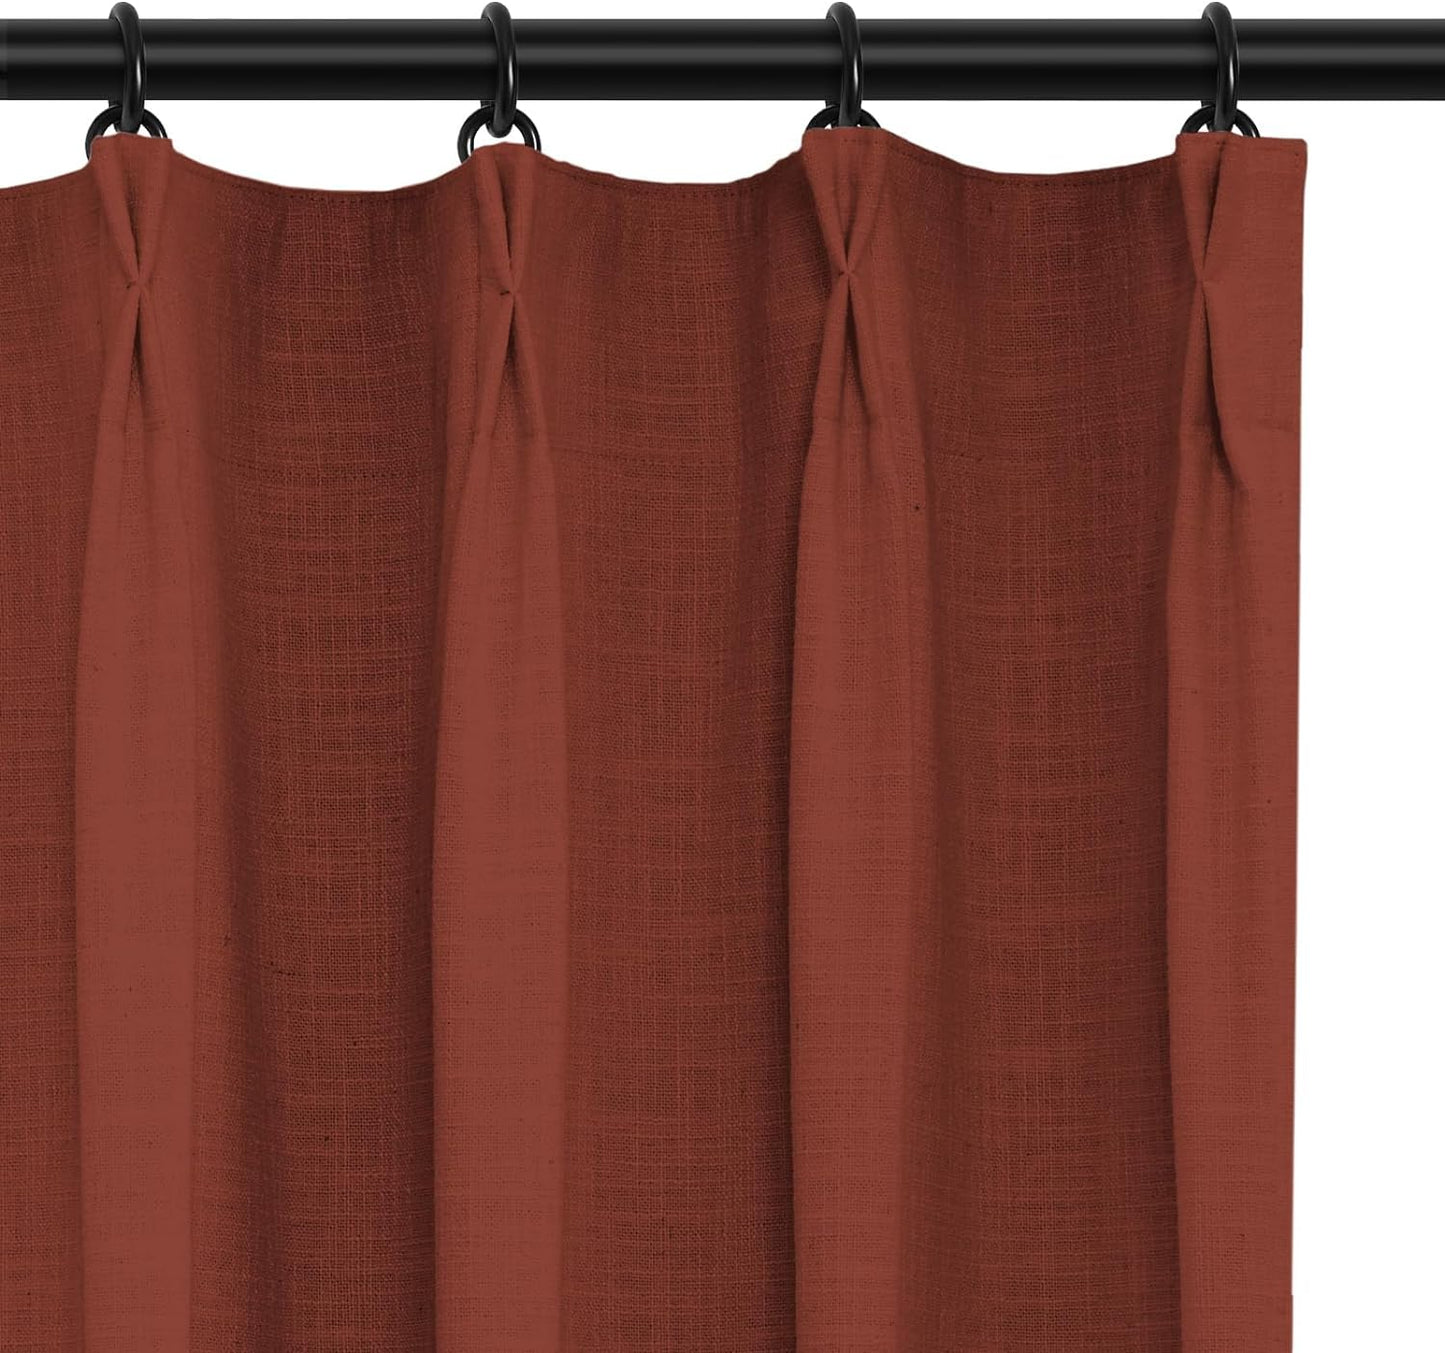 INOVADAY 100% Blackout Curtains for Bedroom, Pinch Pleated Linen Blackout Curtains 96 Inch Length 2 Panels Set, Thermal Room Darkening Linen Curtain Drapes for Living Room, W40 X L96,Beige White  INOVADAY Terracotta 40"W X 84"L-2 Panels 